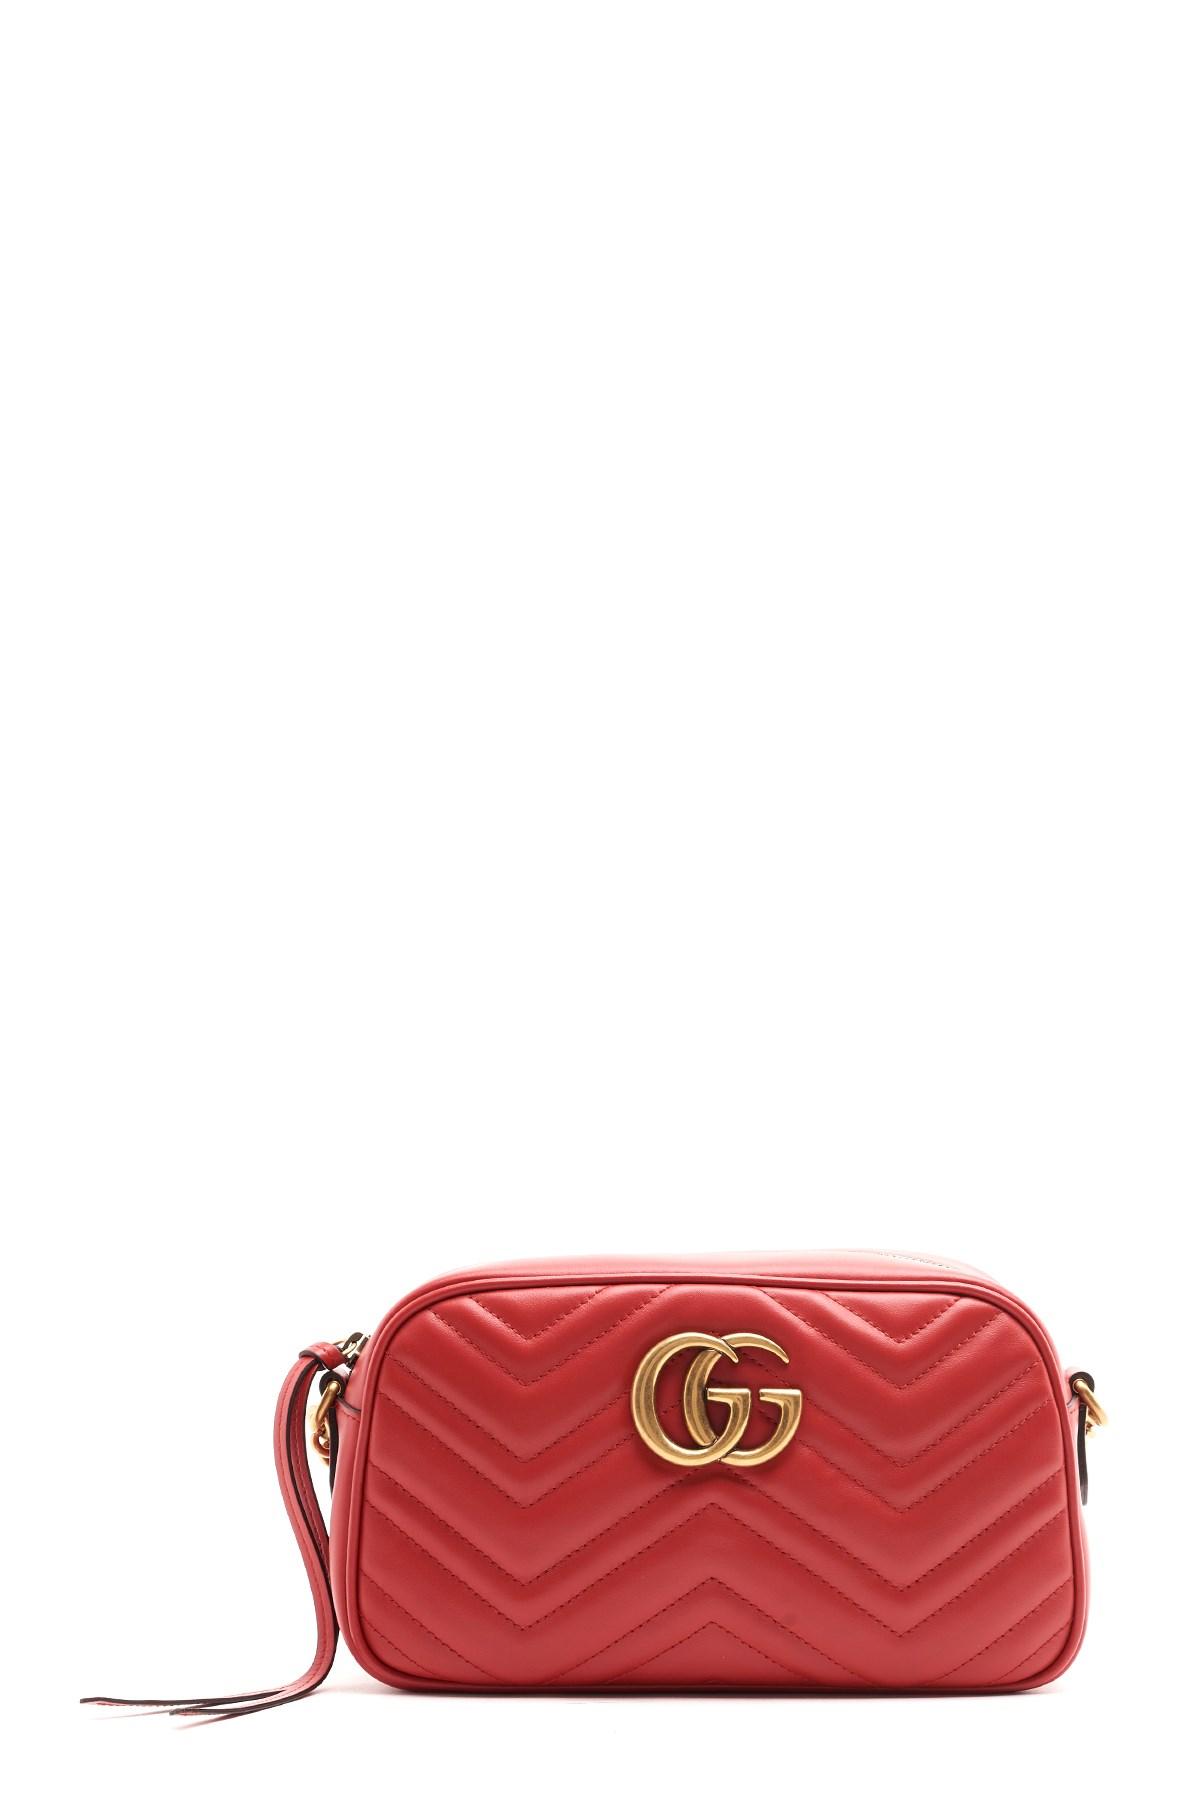 red small gucci bag